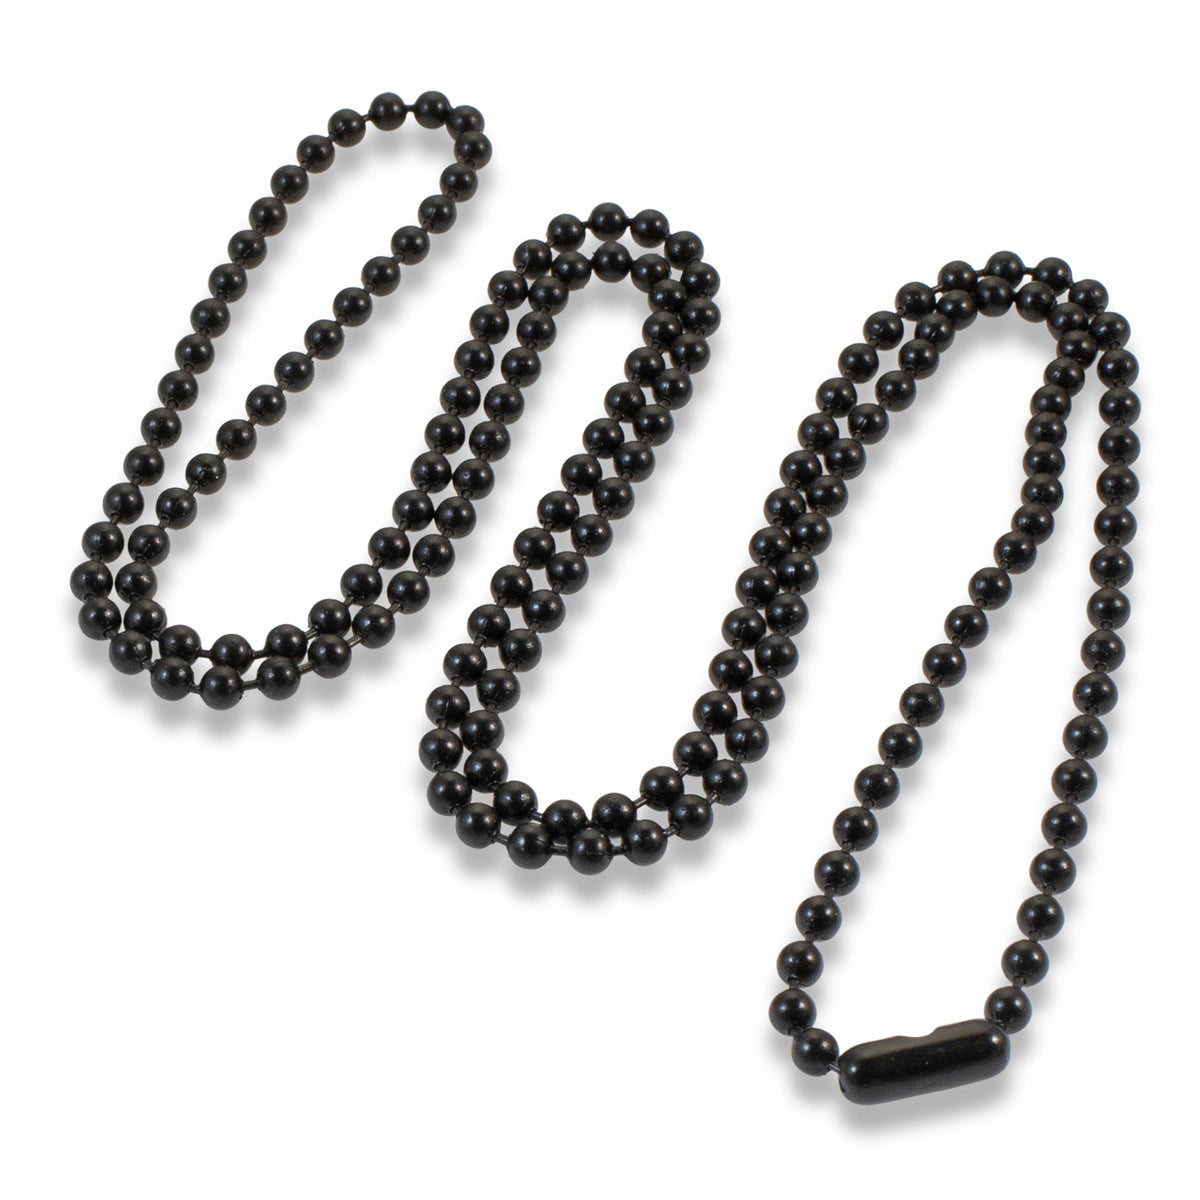 13-foot Ball Chain 2.4 Mm Black Stainless Steel Ball Chain Beads Chain Ball  Dog Necklace, Men's Military Jewelry Making Supplies, Zipper DIY Bracelet